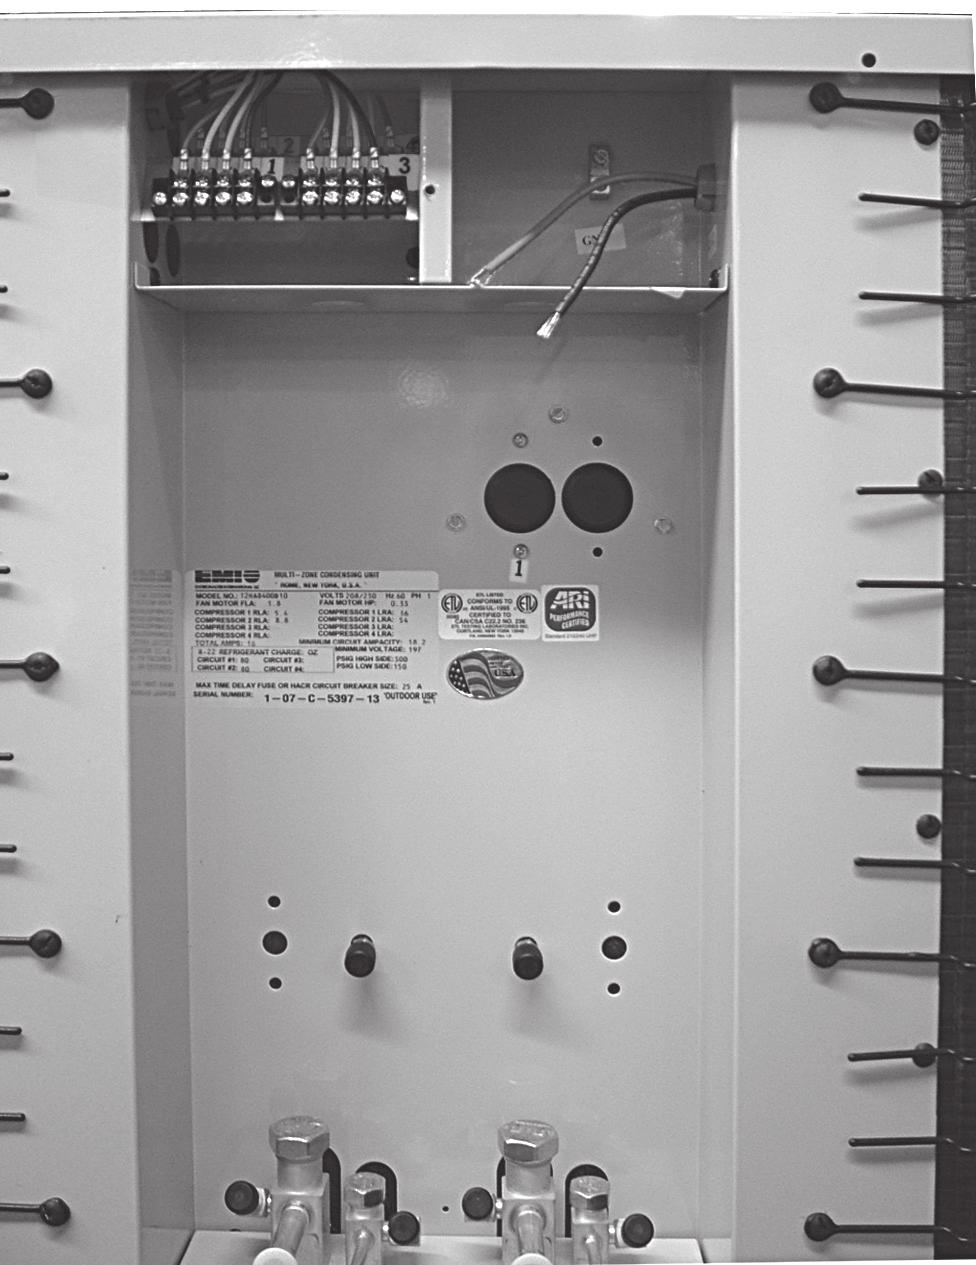 T2HA INSTALLATION INSTRUCTIONS ELECTRICAL WIRING 5. With a screwdriver punch out and rem o v e t h e knock-outs in the low & high Volt electrical c o n n e c t i o n box.